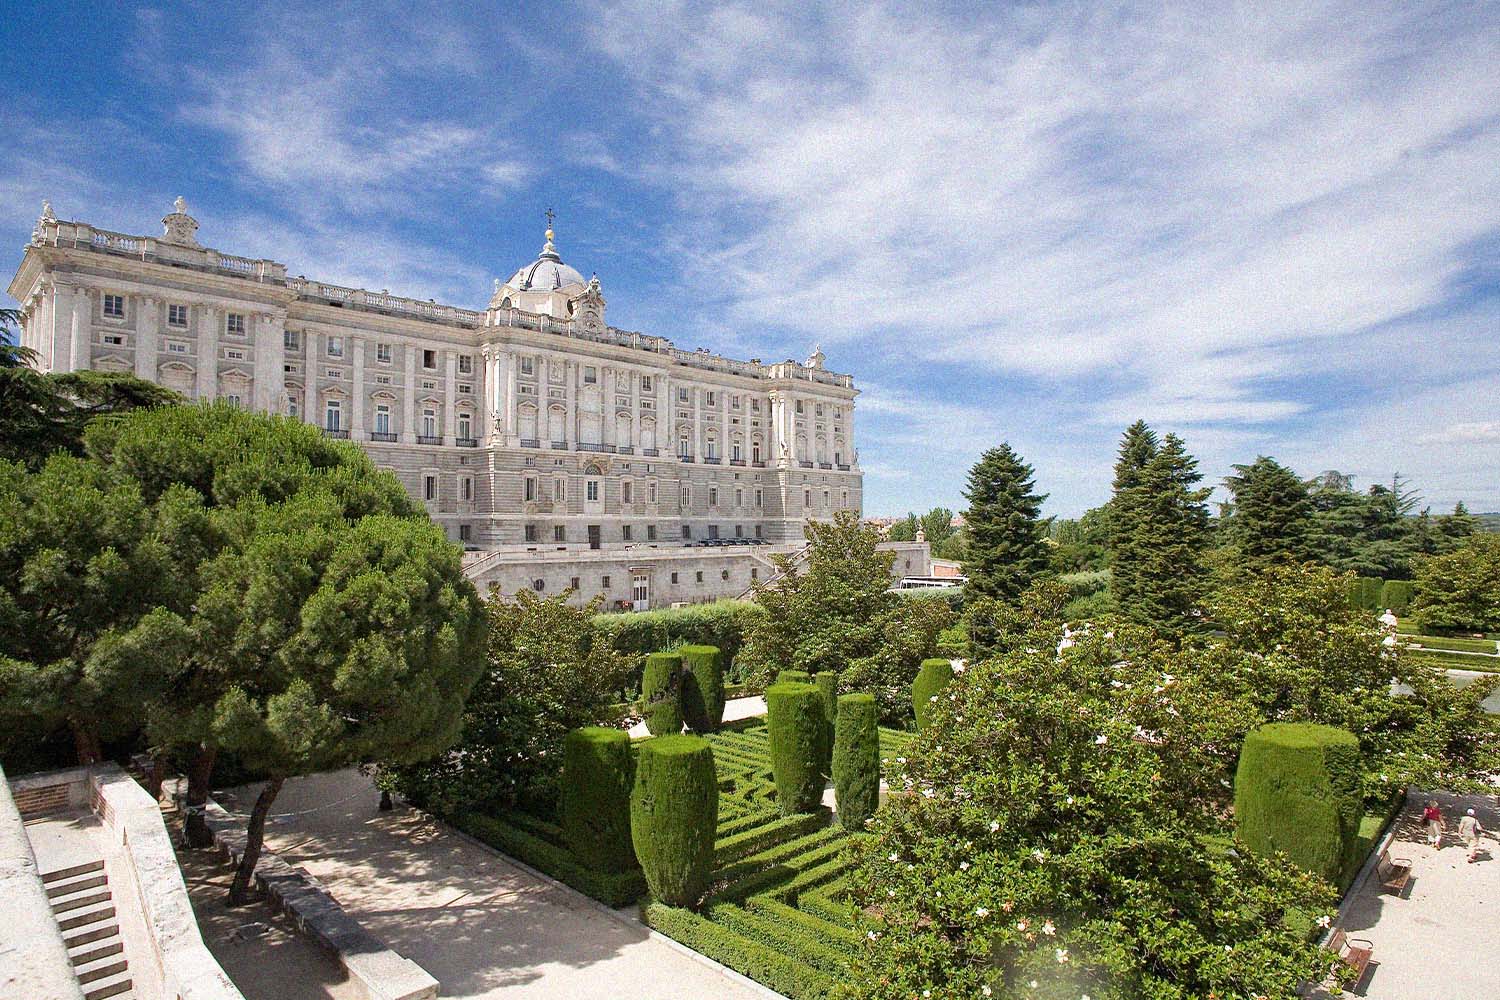 The Sabatini Gardens and the Royal Palace in the background